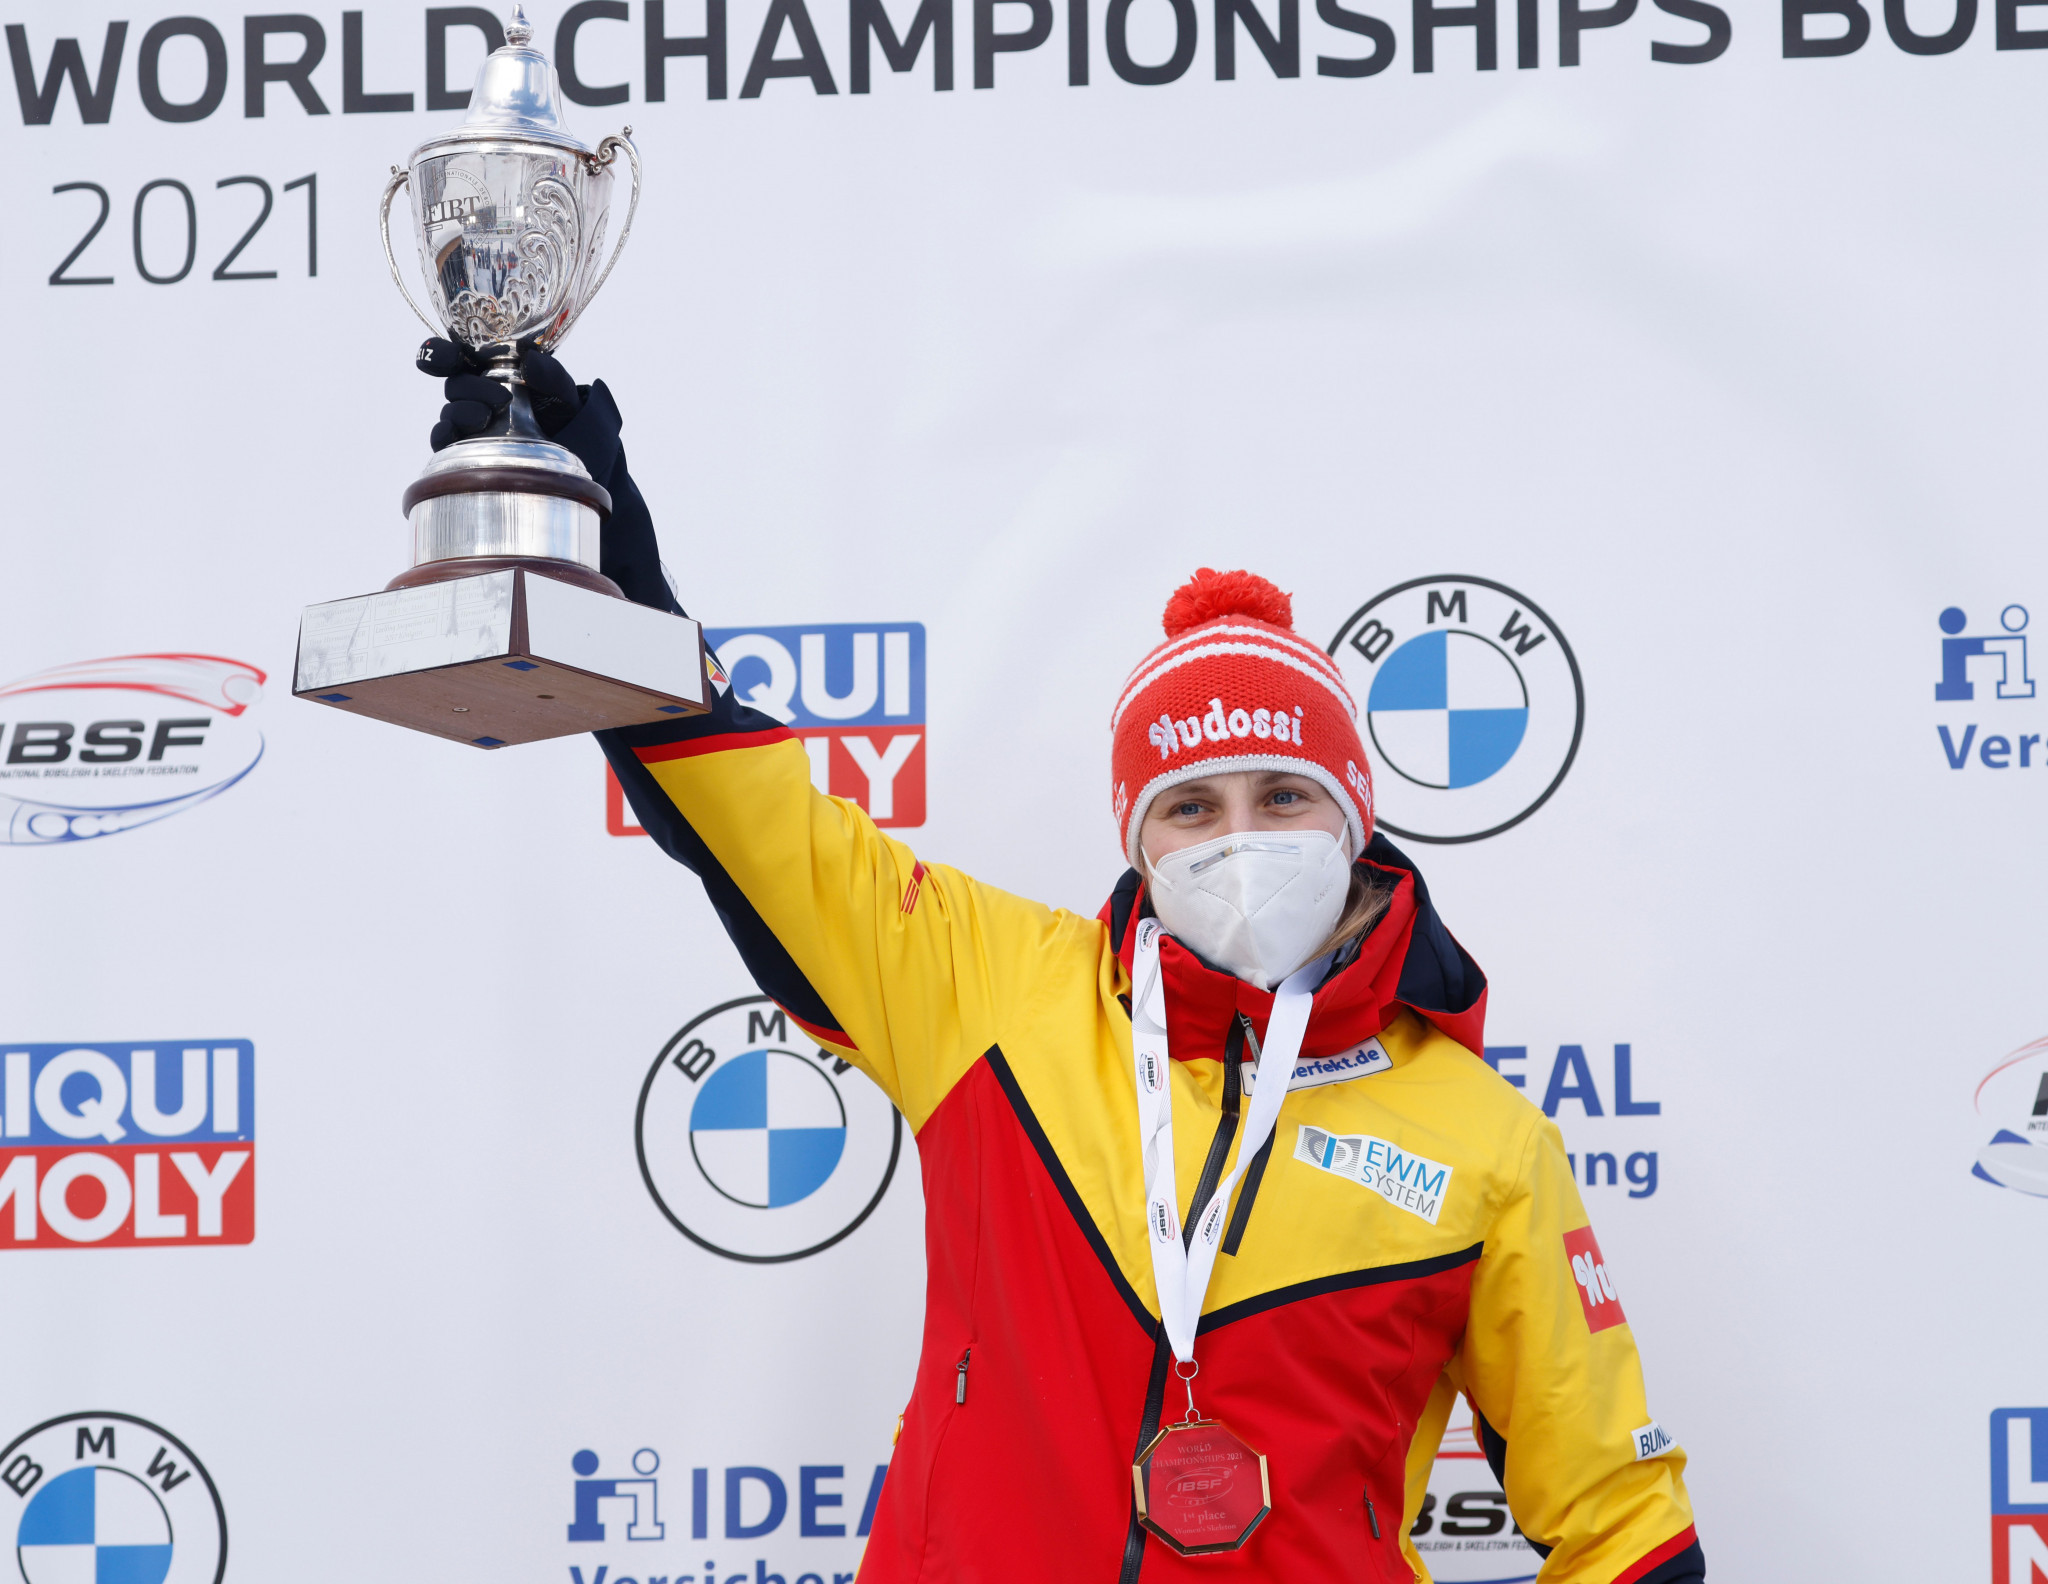 Hermann completes turnaround to win women's skeleton title at IBSF World Championships